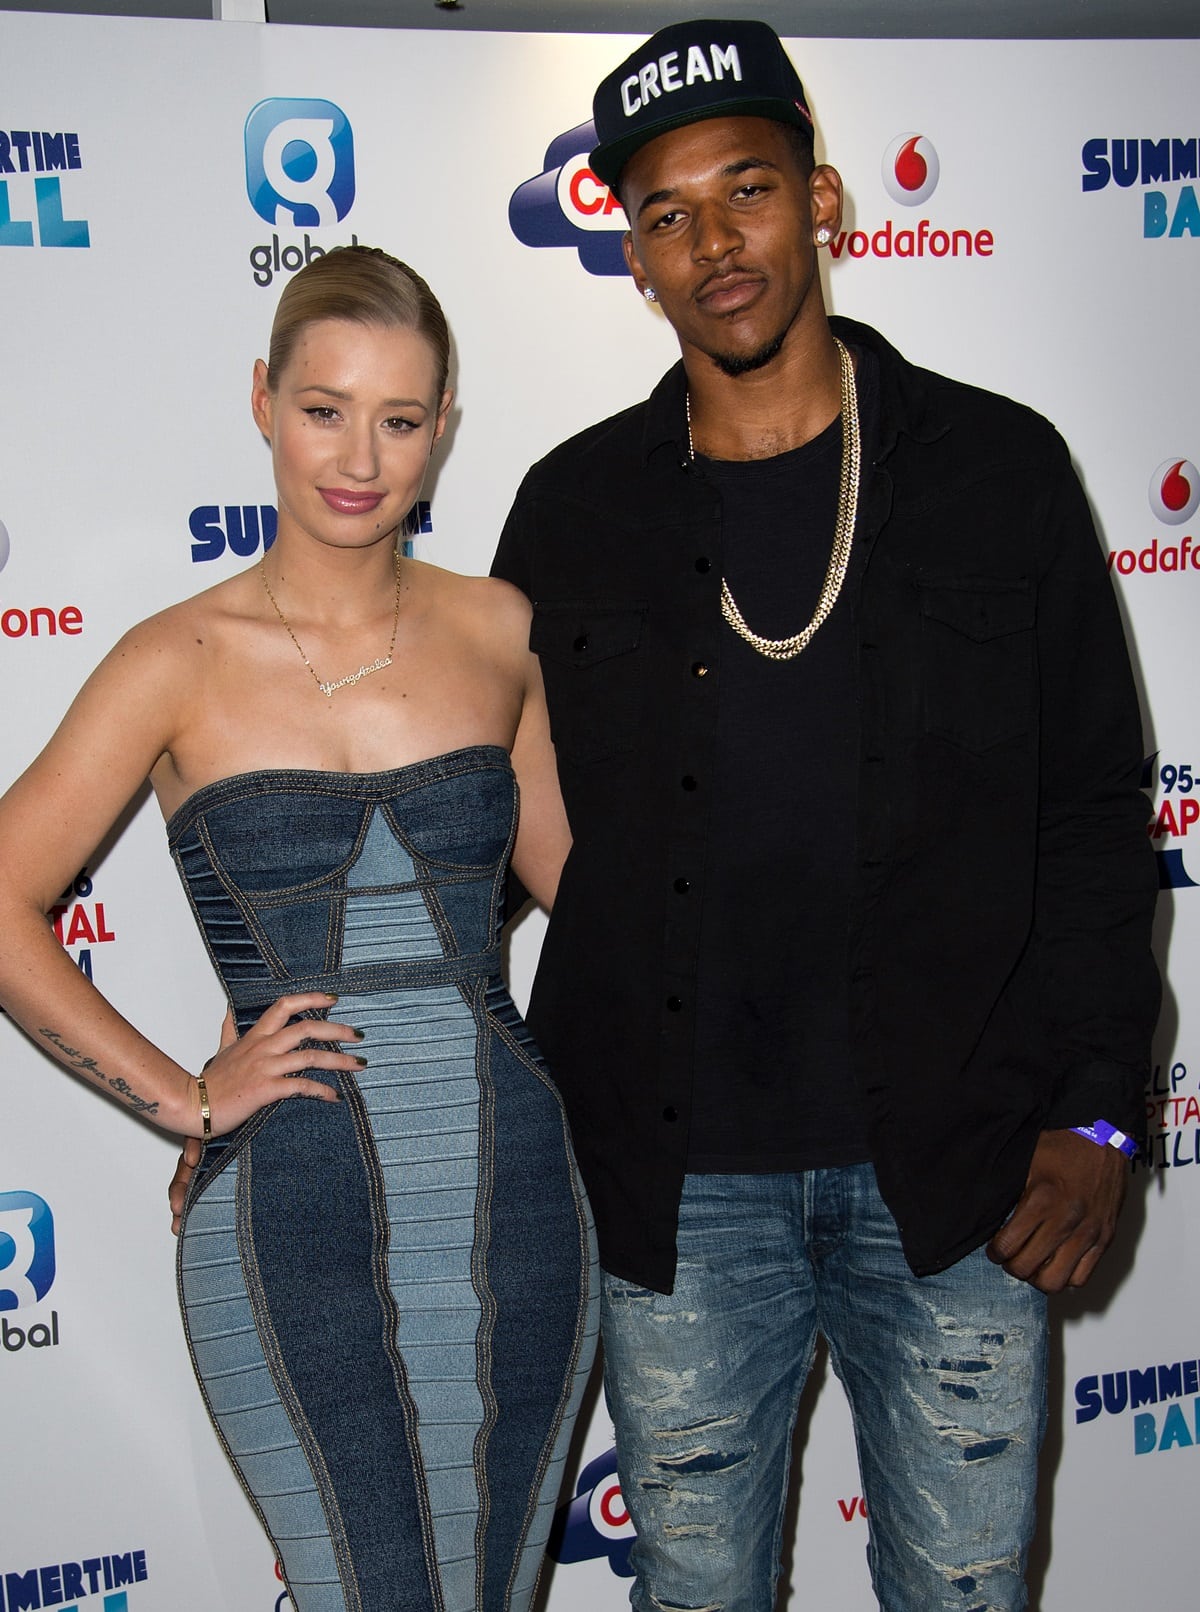 Nick Young and Iggy Azalea were engaged on June 1, 2015, after starting their relationship in 2013 at a pool party, but they never got married